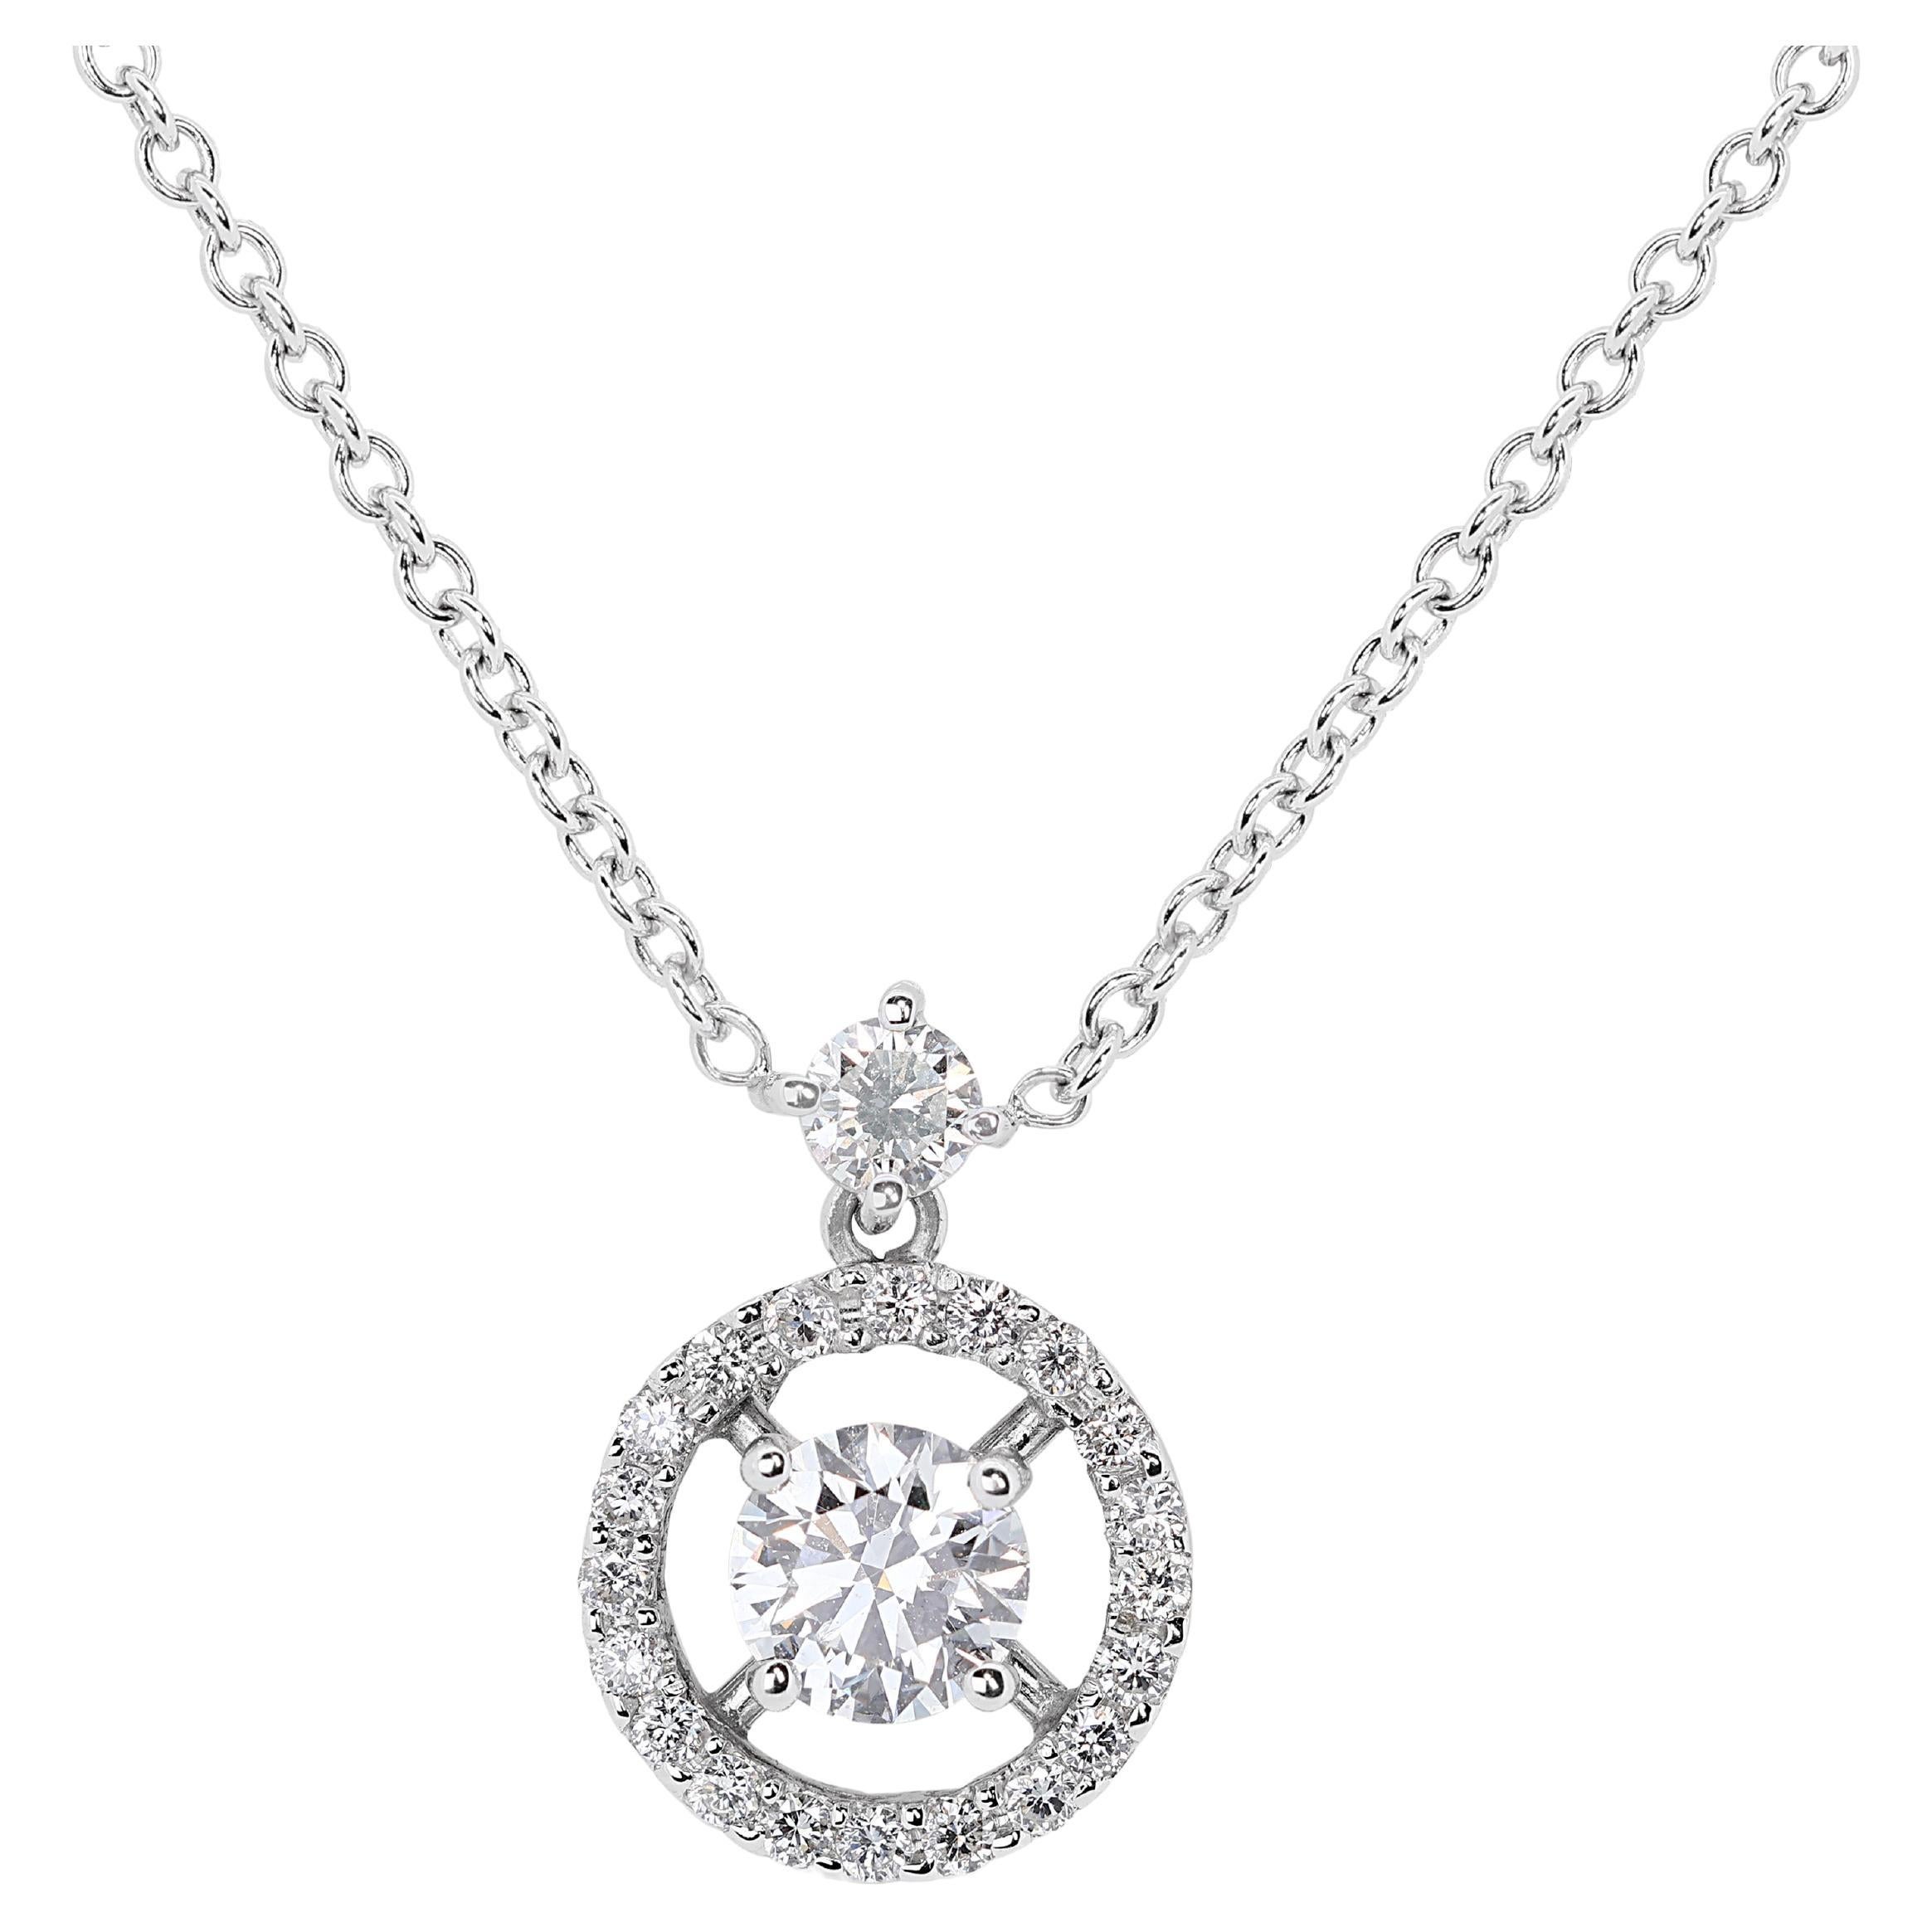 Majestic 0.96ct Diamonds Necklace w/ Pendant in 18K White Gold (Chain Included)  For Sale